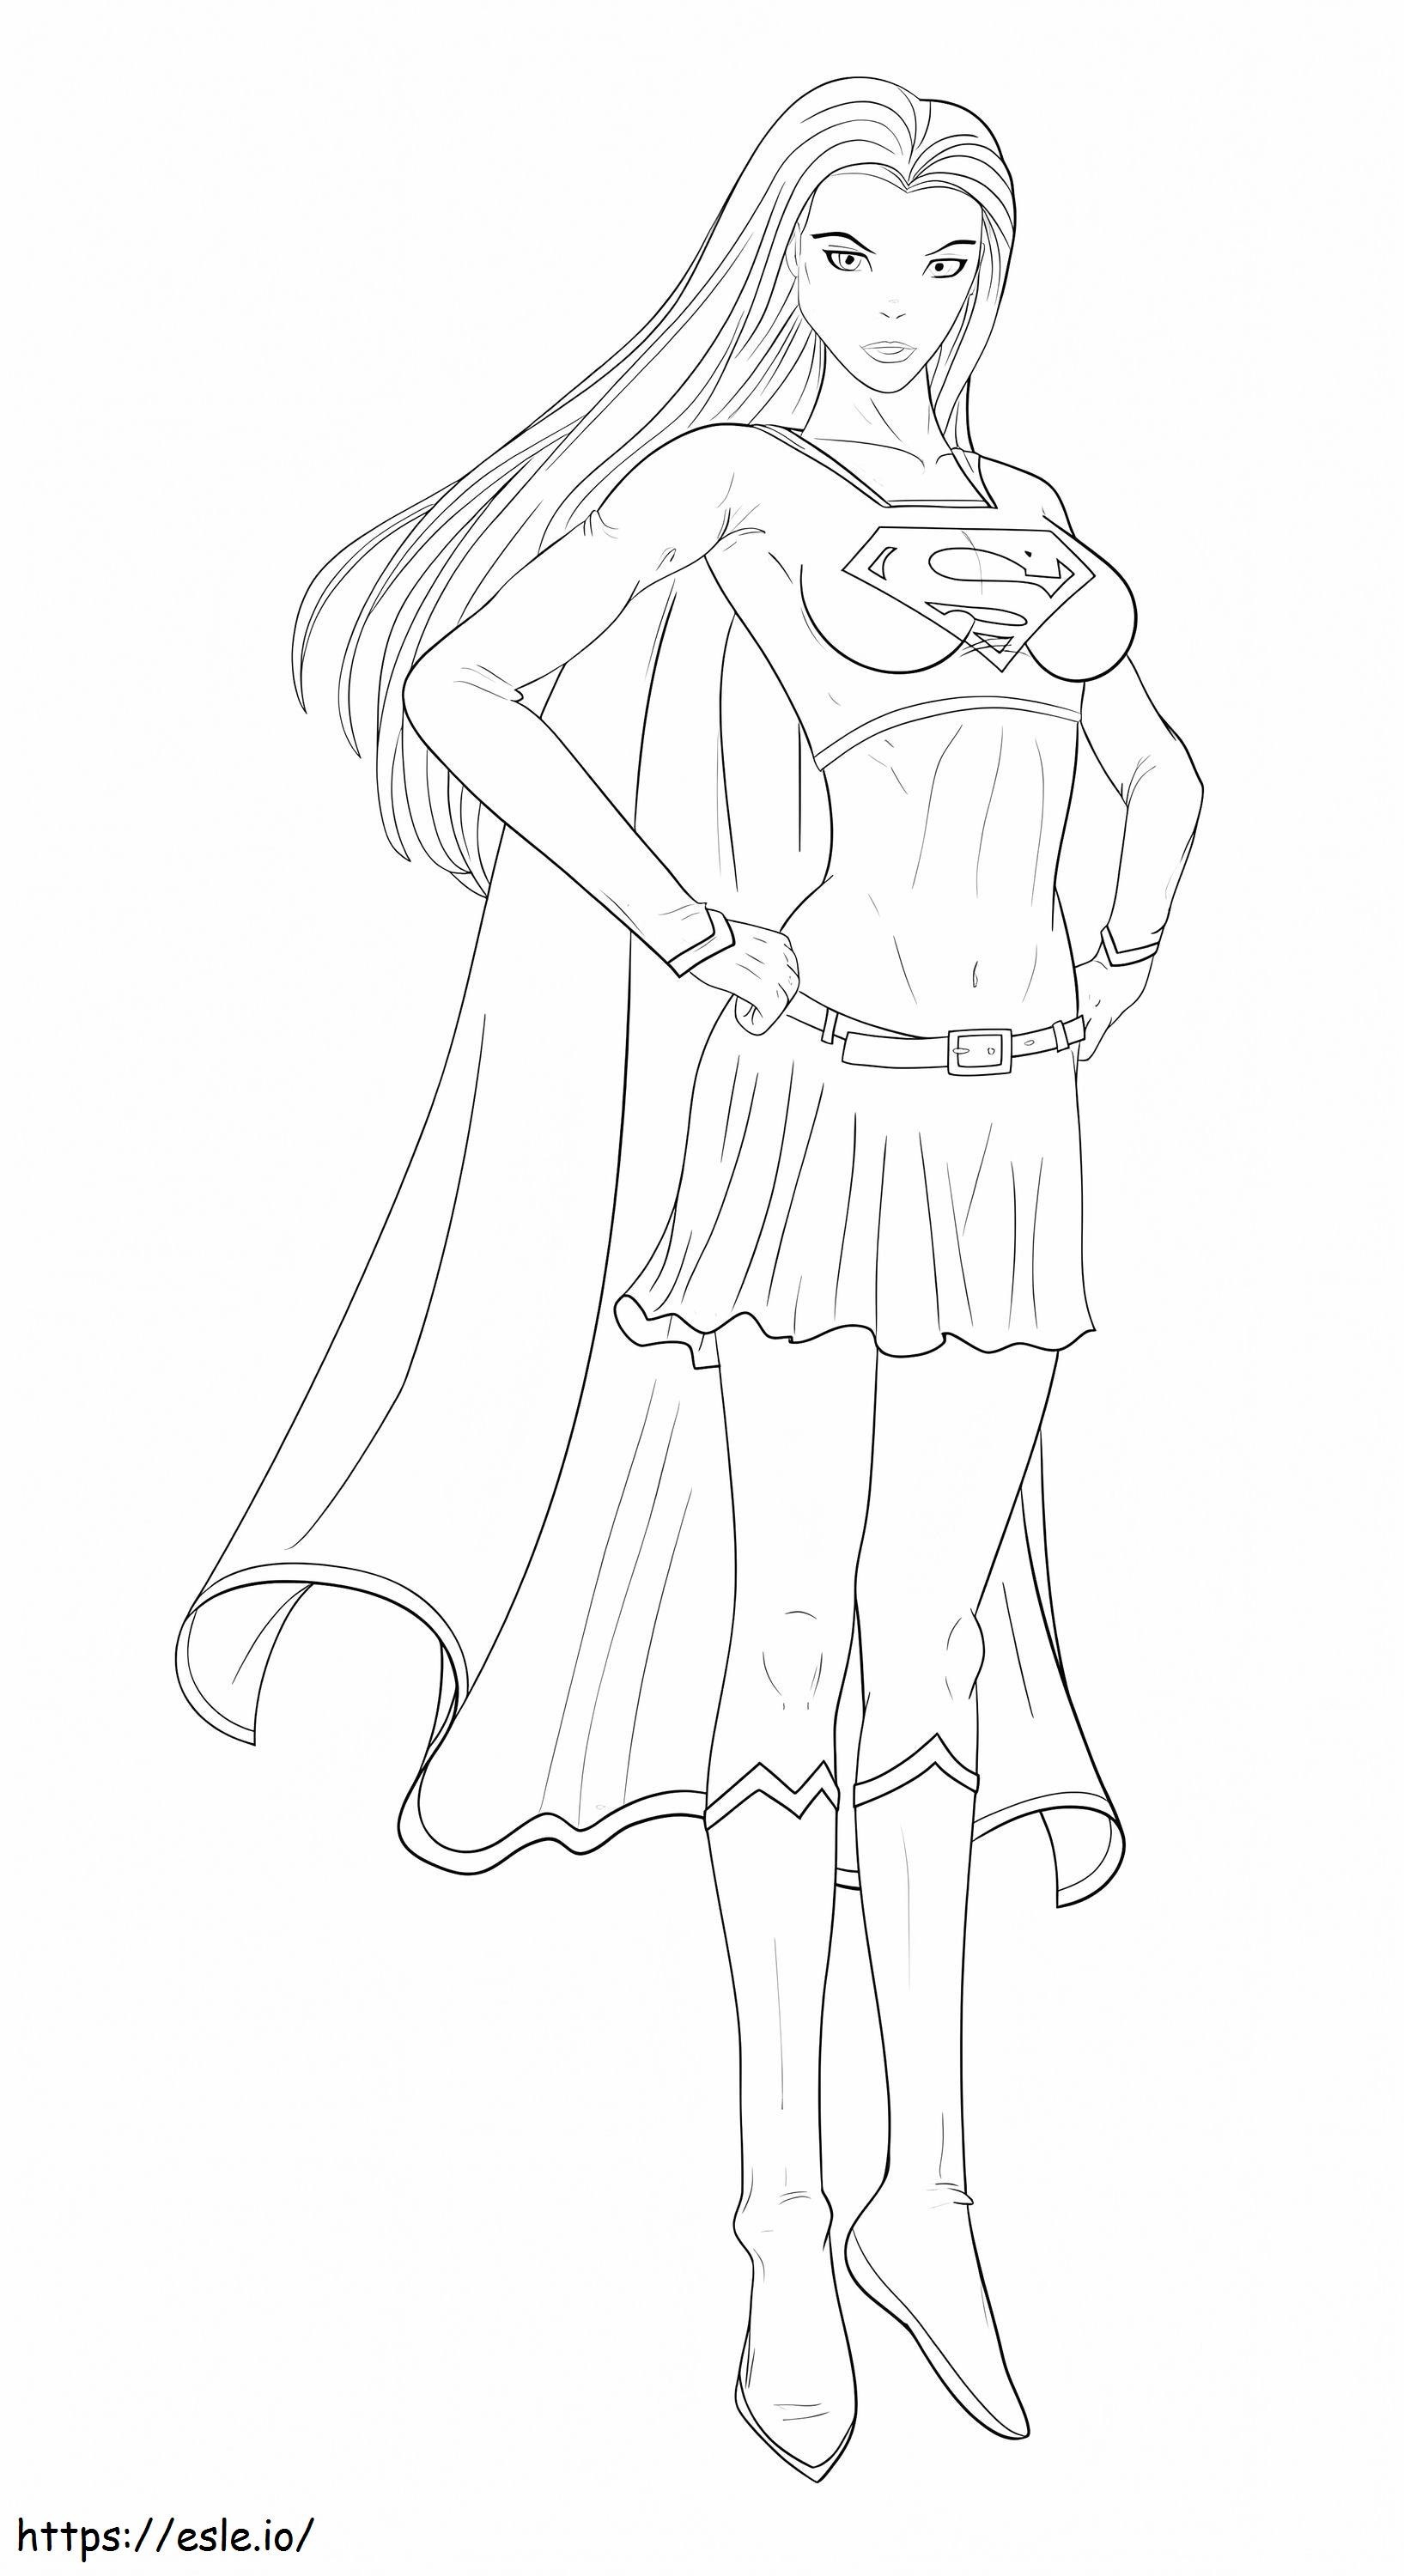 Supergirl coloring page